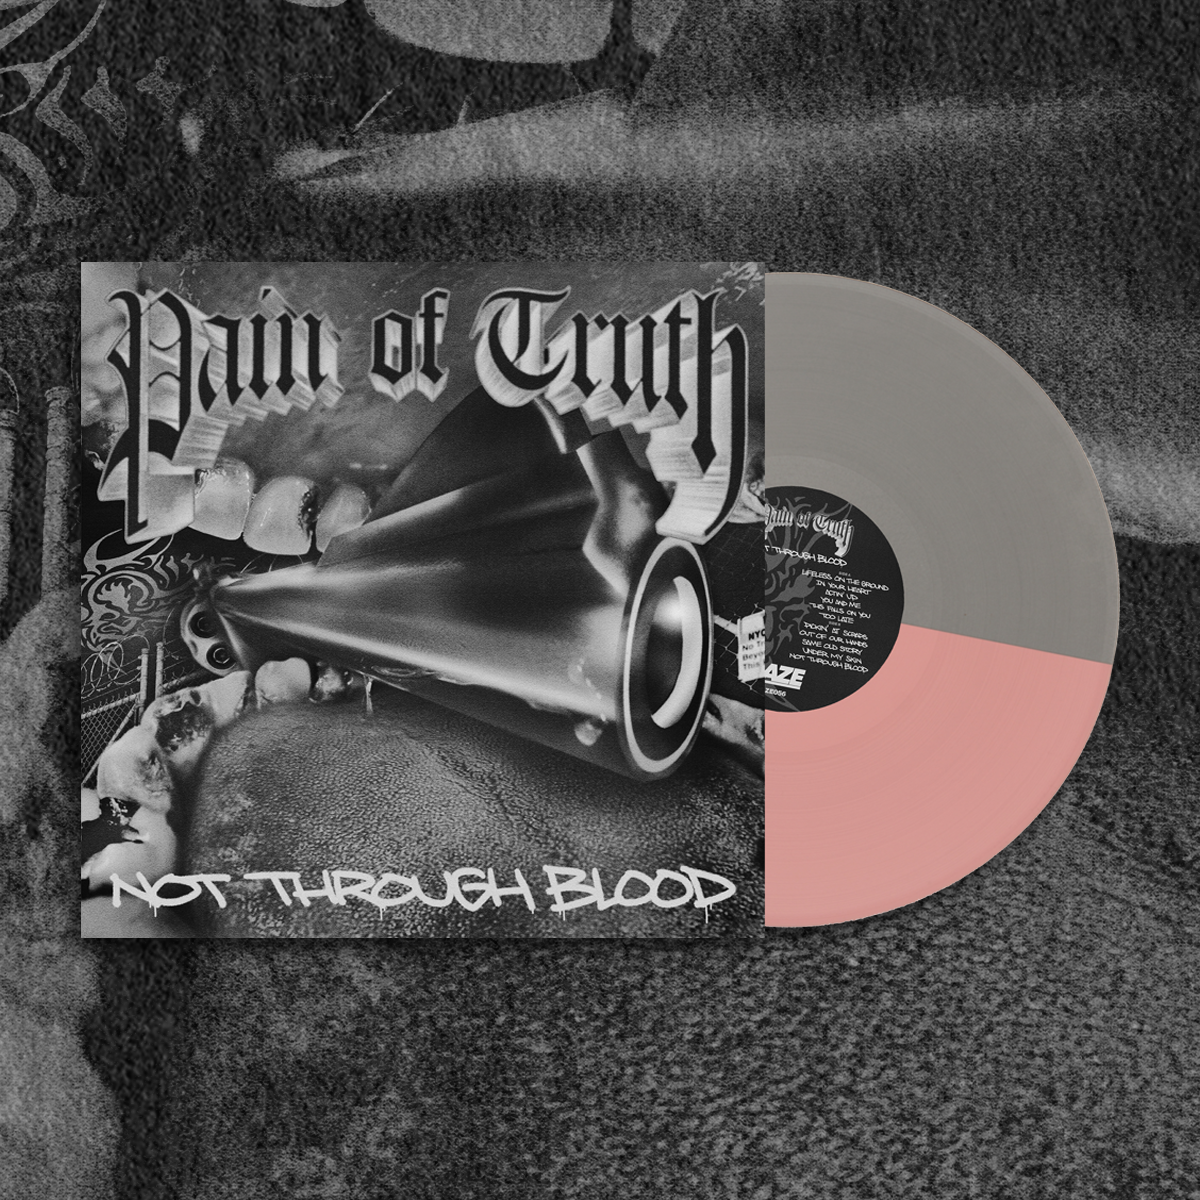 PAIN OF TRUTH "NOT THROUGH BLOOD" LP - HALF SILVER / HALF PINK